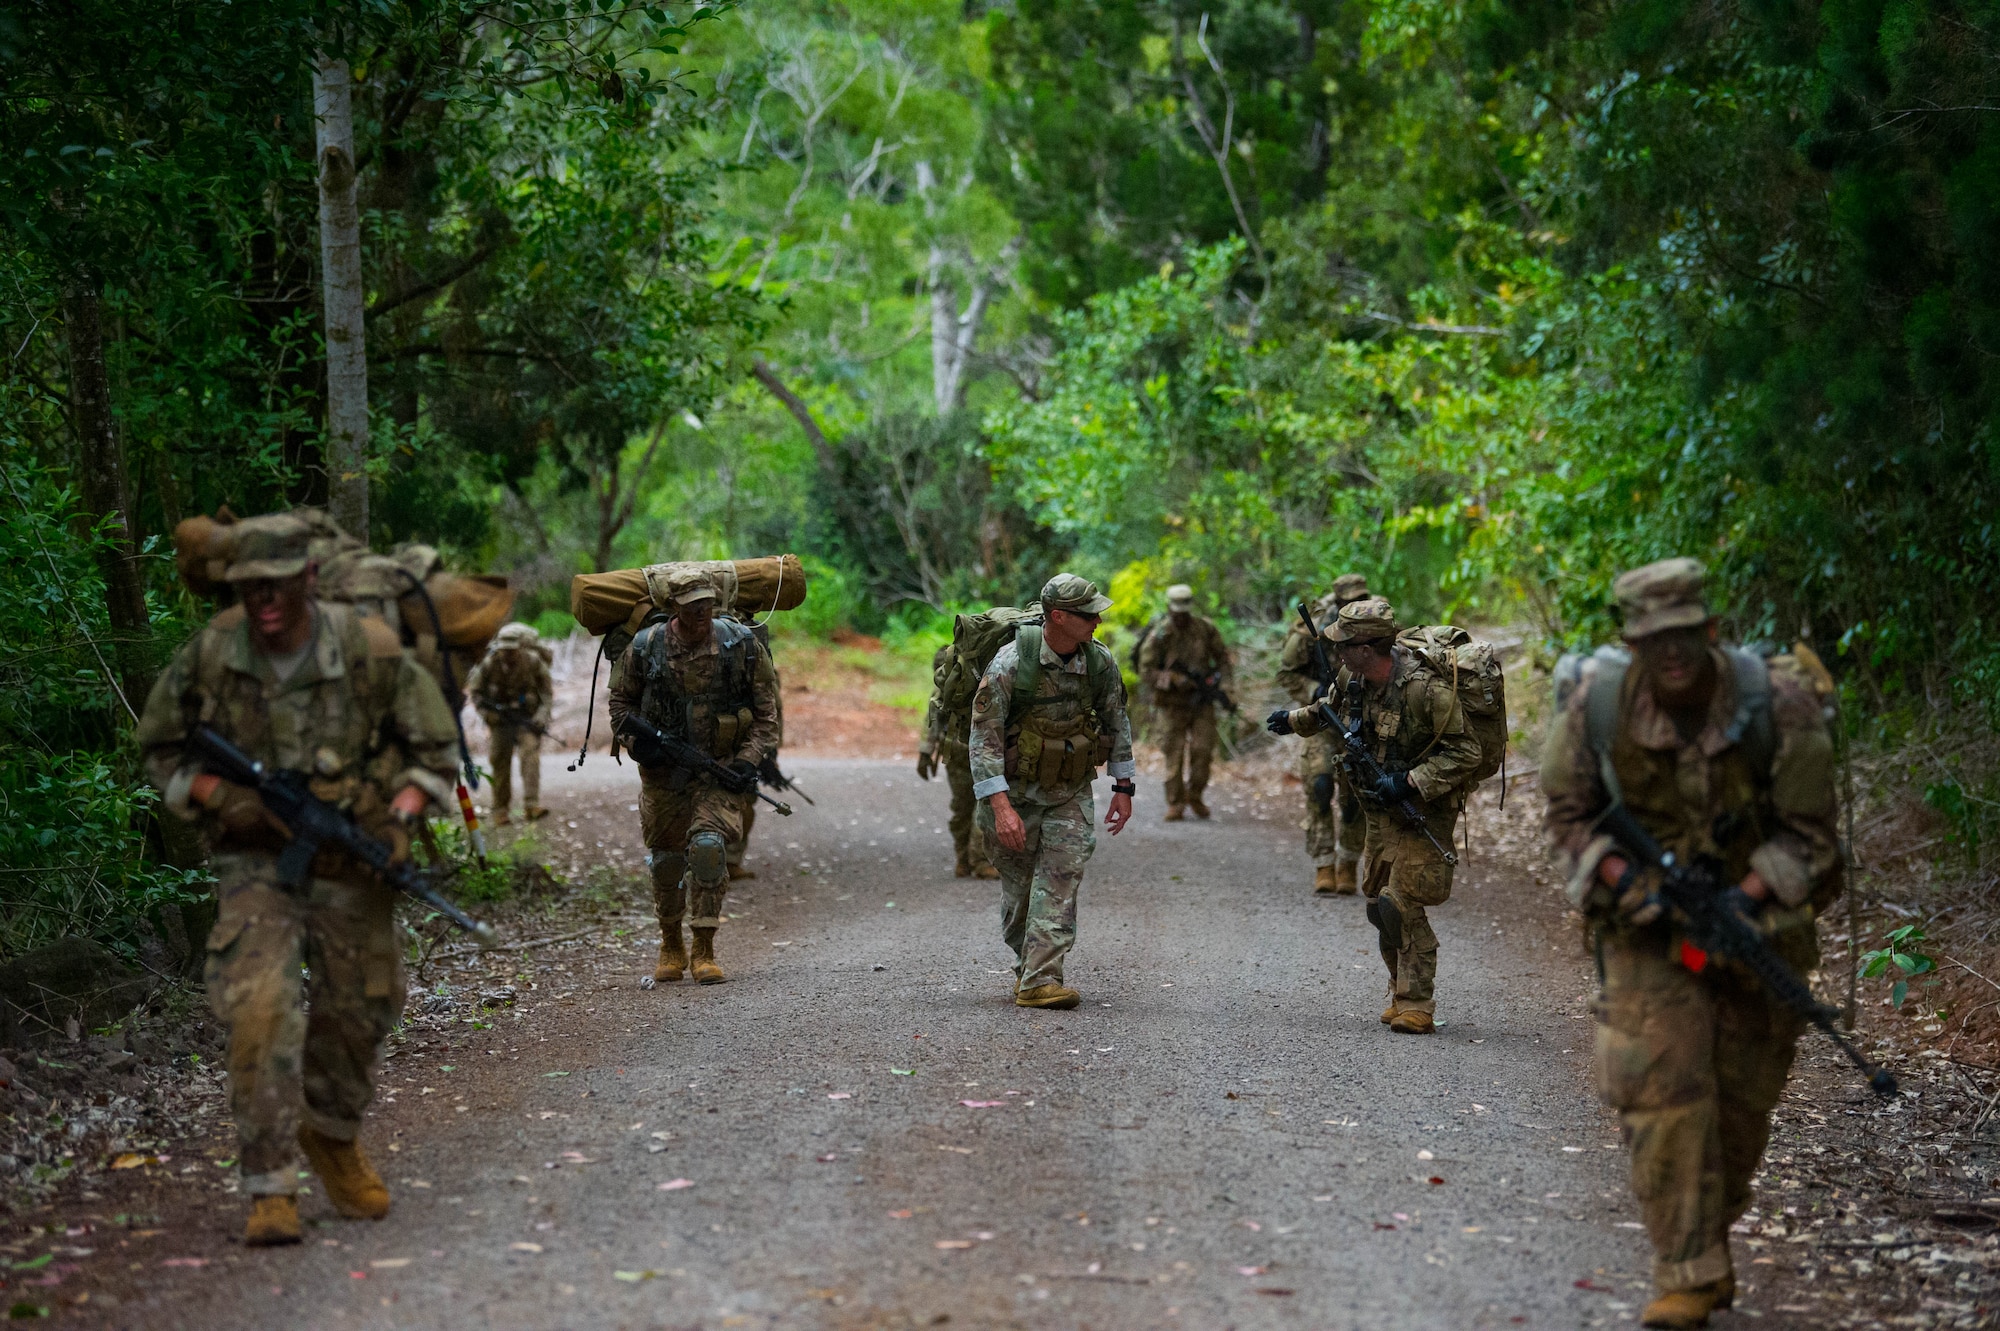 Ranger Assessment Course students ruck march along the road during training near Schofield Barracks, Oahu, Hawaii, May 23, 2019. Twenty-three Airmen from across the Air Force recently converged on a training camp for a three-week Ranger Assessment Course May 12-31, 2019. (U.S. Air Force photo by Staff Sgt. Hailey Haux)